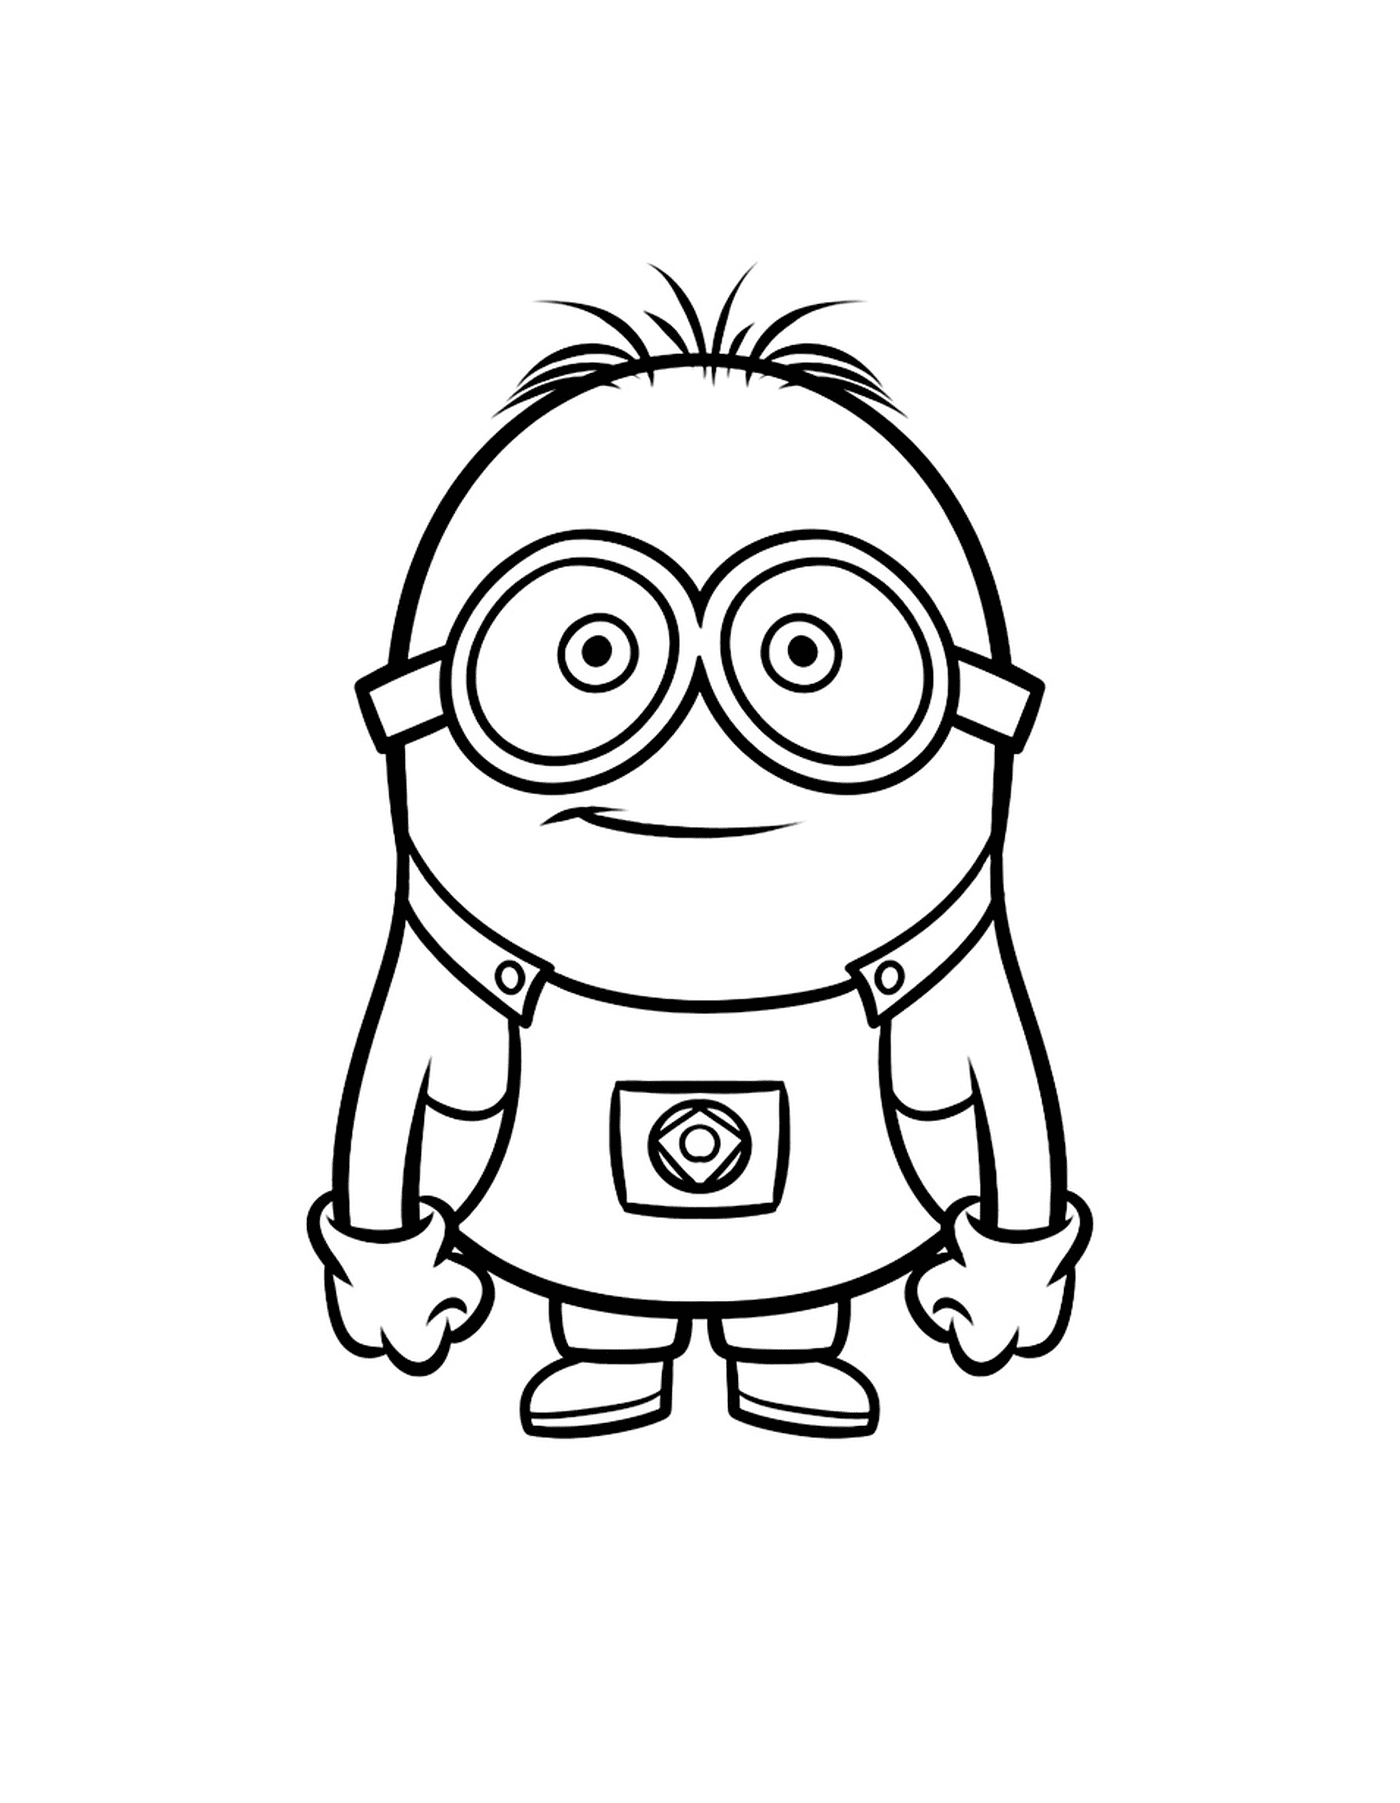  Young Minion with glasses, animated character 